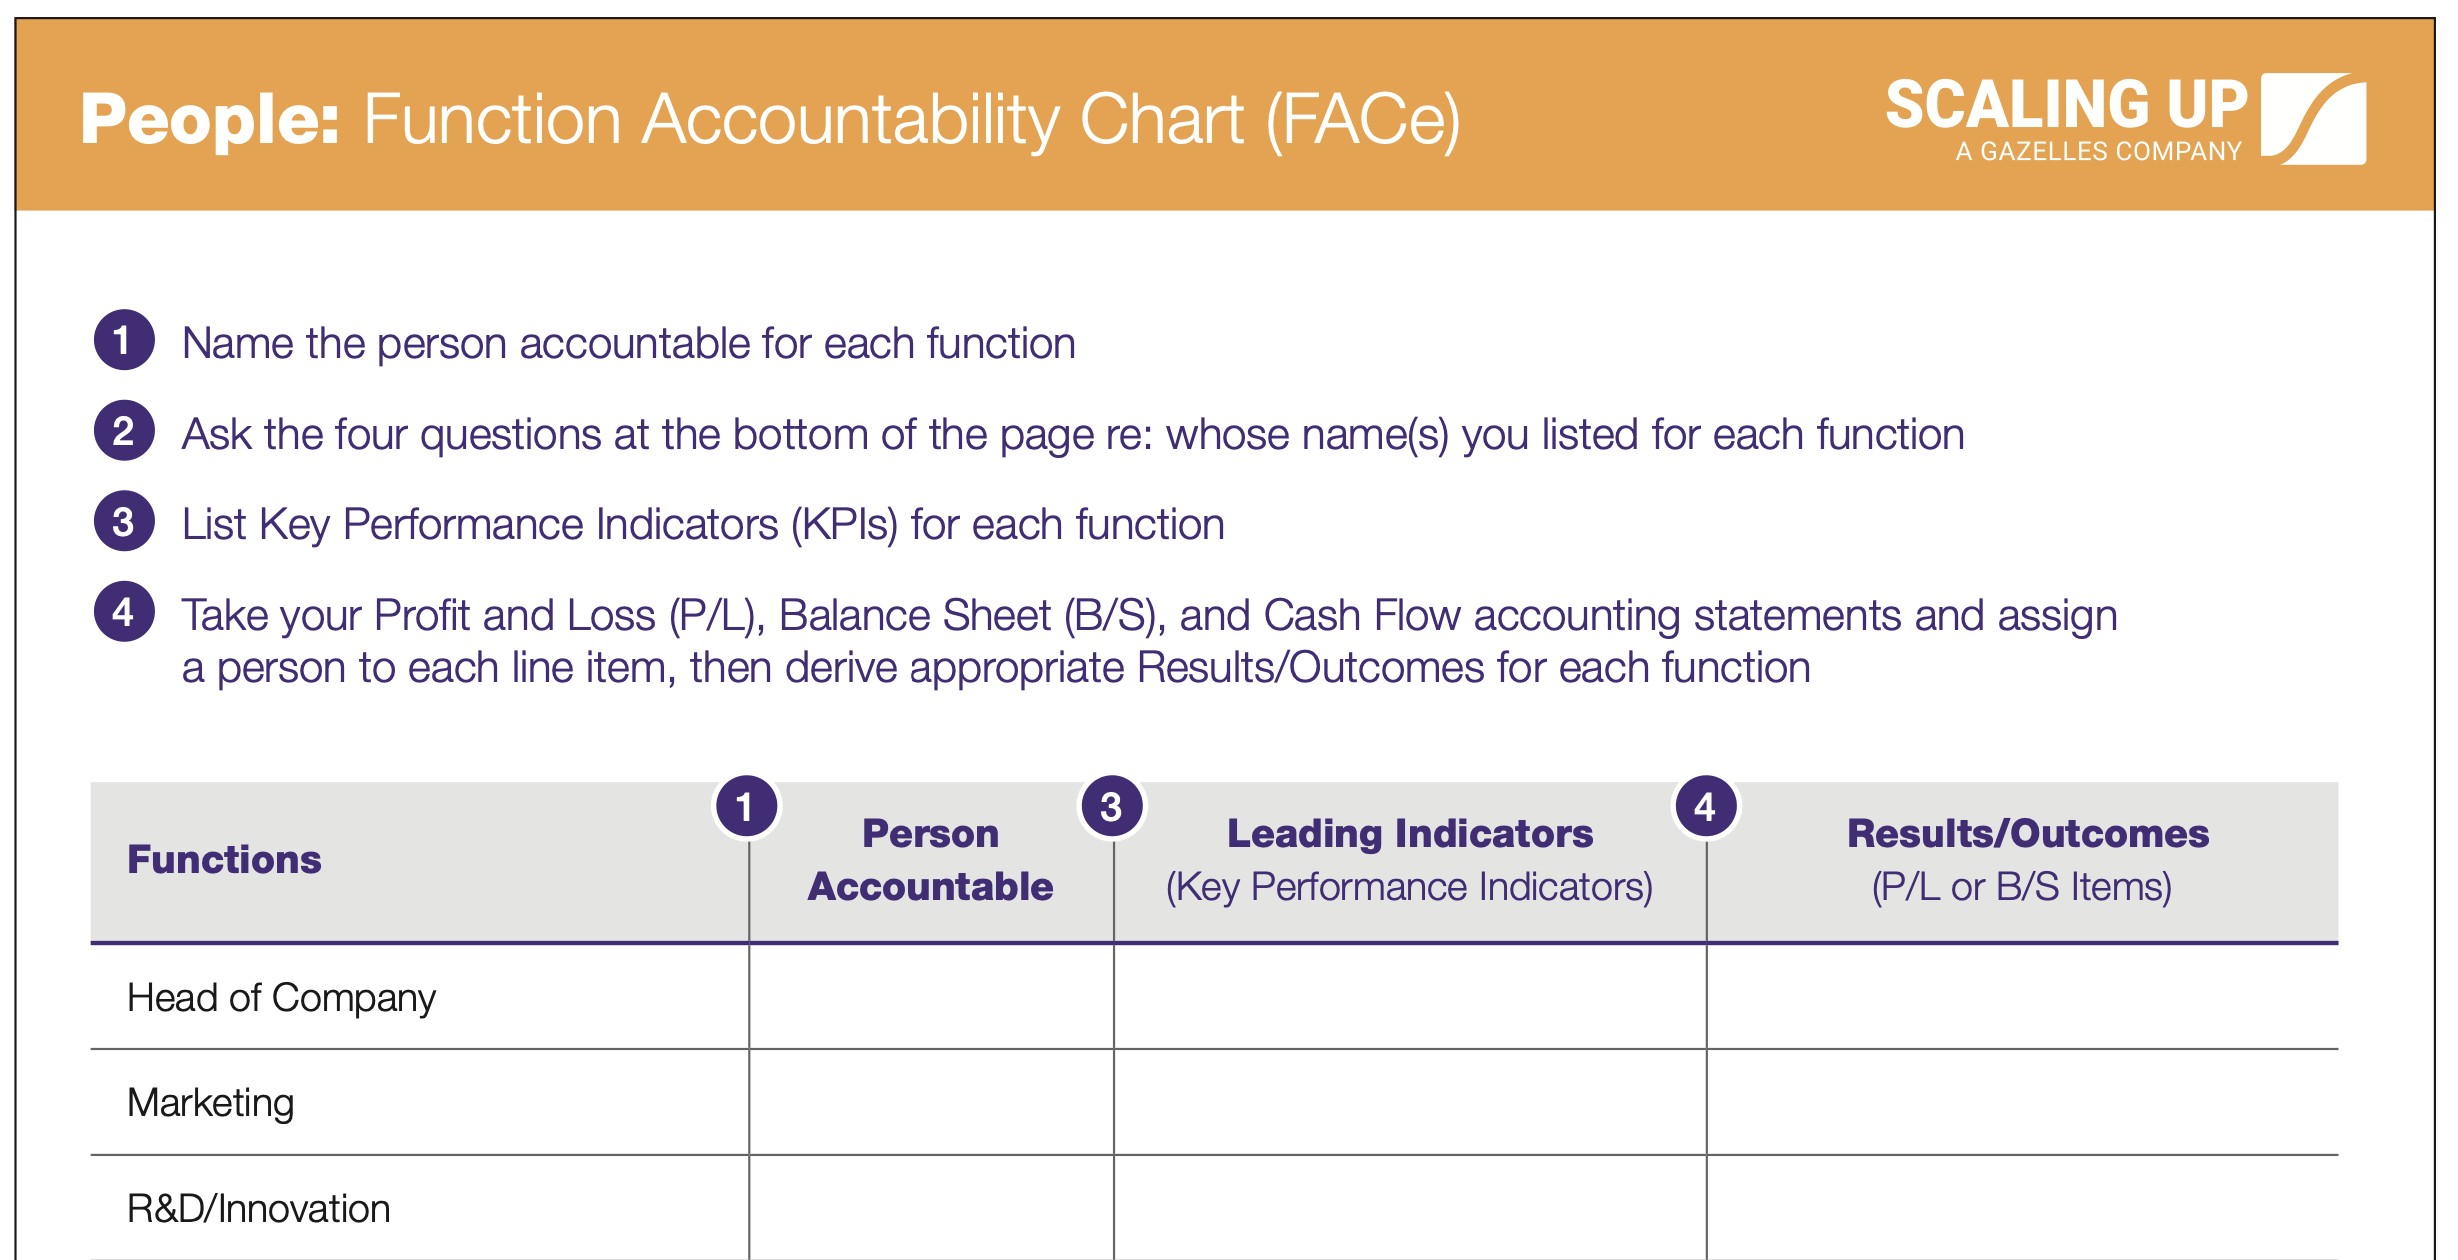  - Scaling Up FACe: Steps for The Functional Acountability Chart